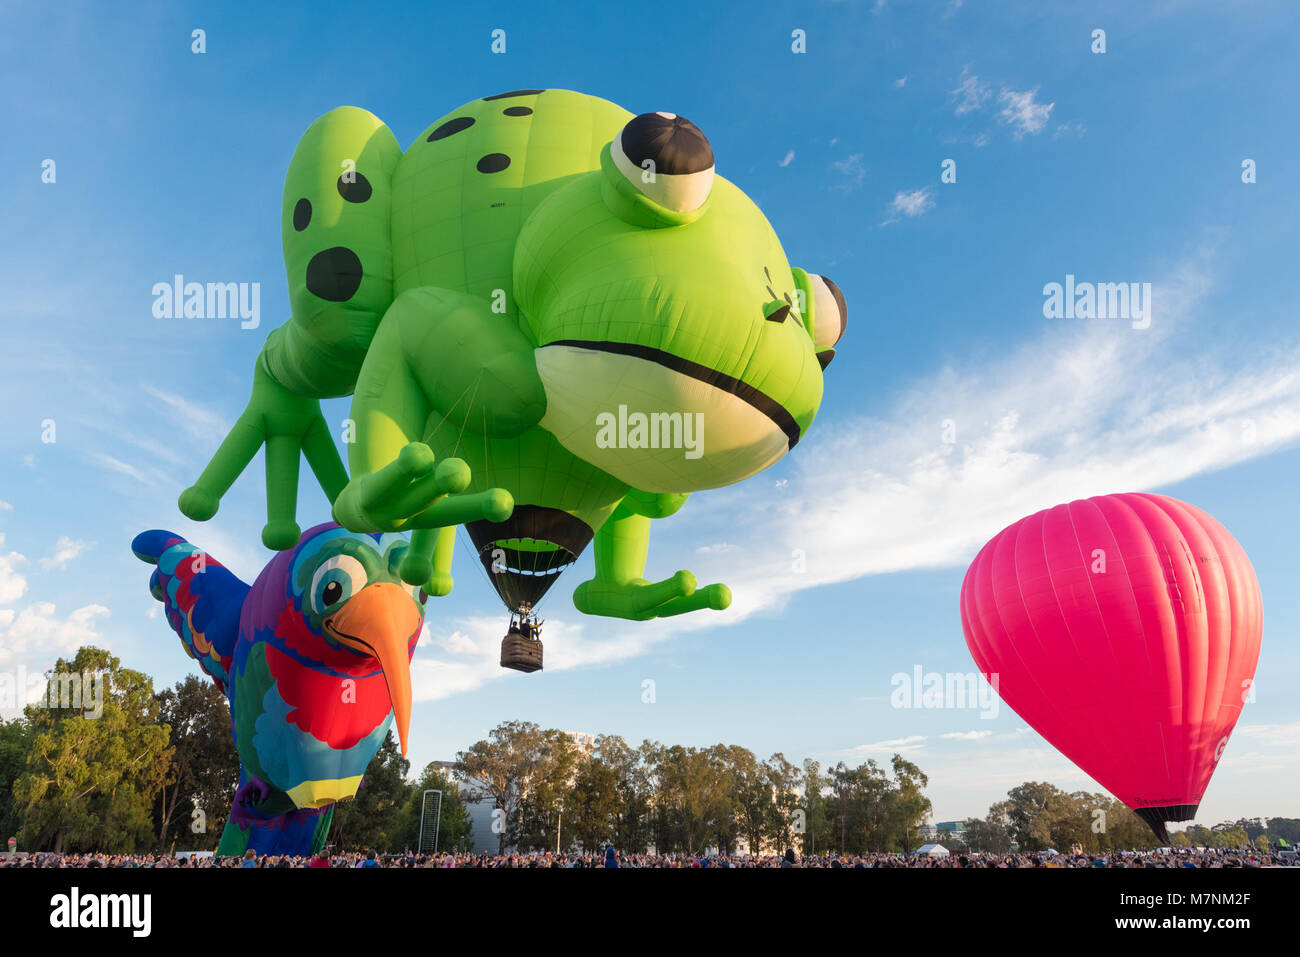 Canberra, Australia, 12th March, 2018. Hot air balloon festival in Canberra. Kermie is a colourful sight as it soars above the Hummingbird hot air balloon. Kermie had no trouble inflating on this windless morning at the hot air balloon event in Canberra, Australia. Sam Nerrie/Alamy Live News Stock Photo